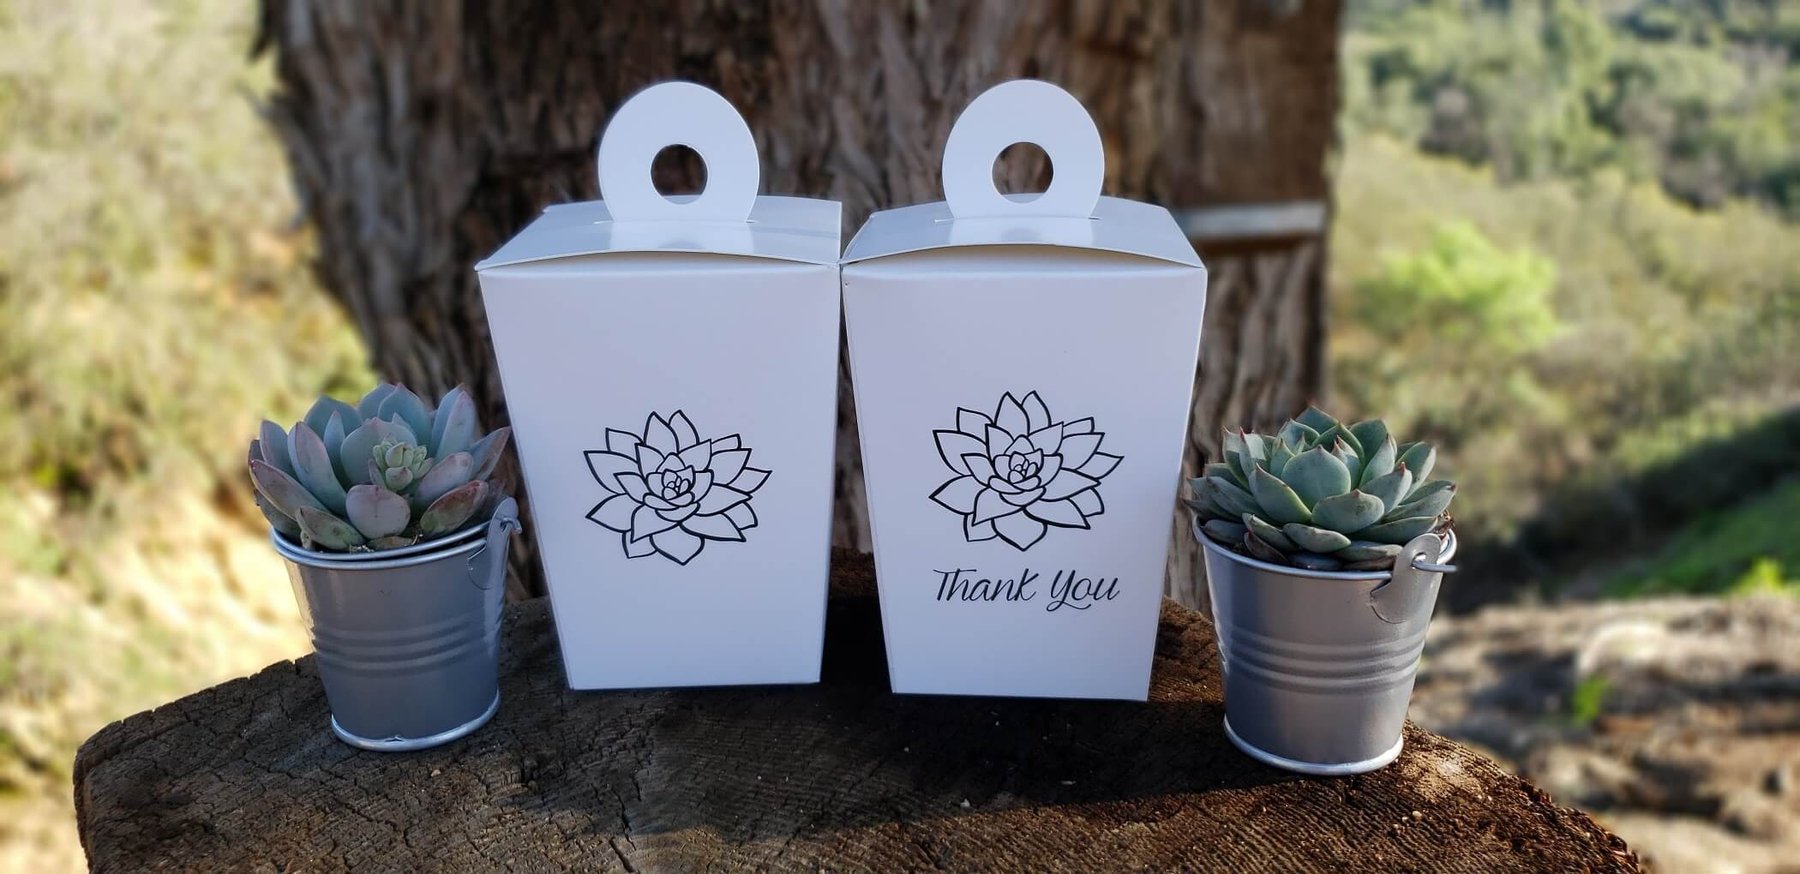 Bulk Farewell Gifts for Coworkers: DIY Desk Succulents — Calm & Chic